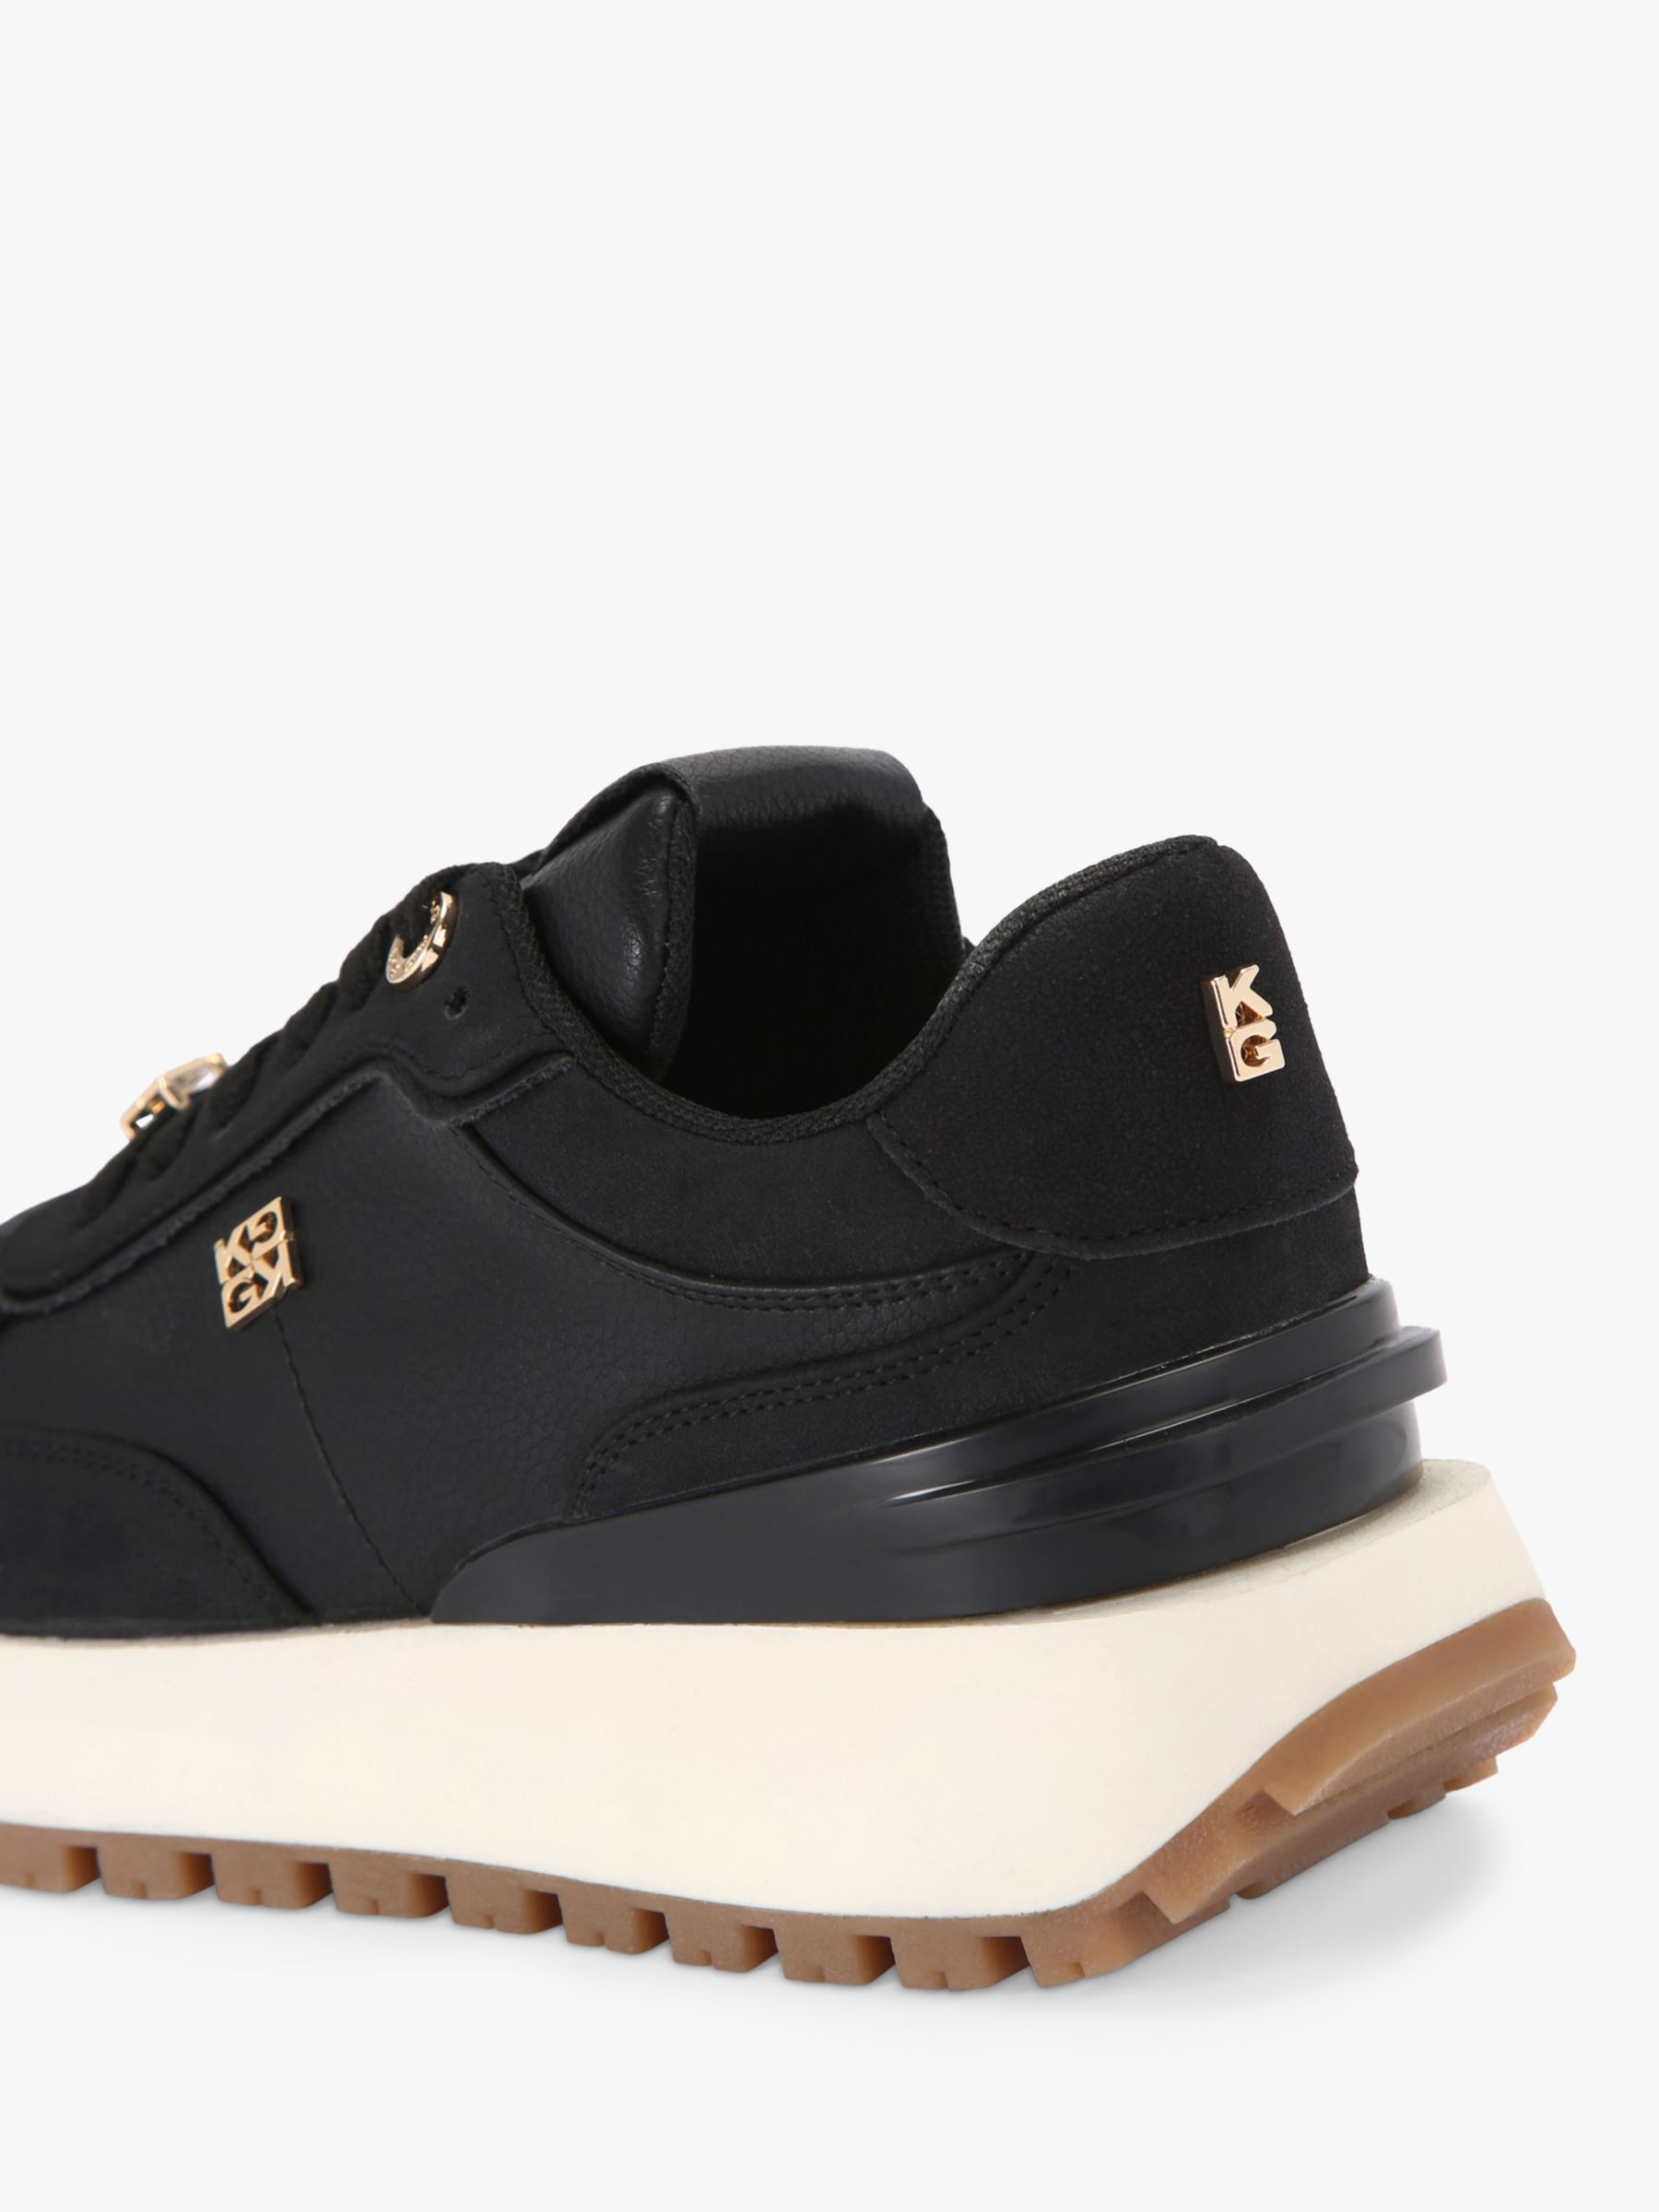 Buy KG Kurt Geiger Louisa Chunky Sole Trainers Online at johnlewis.com